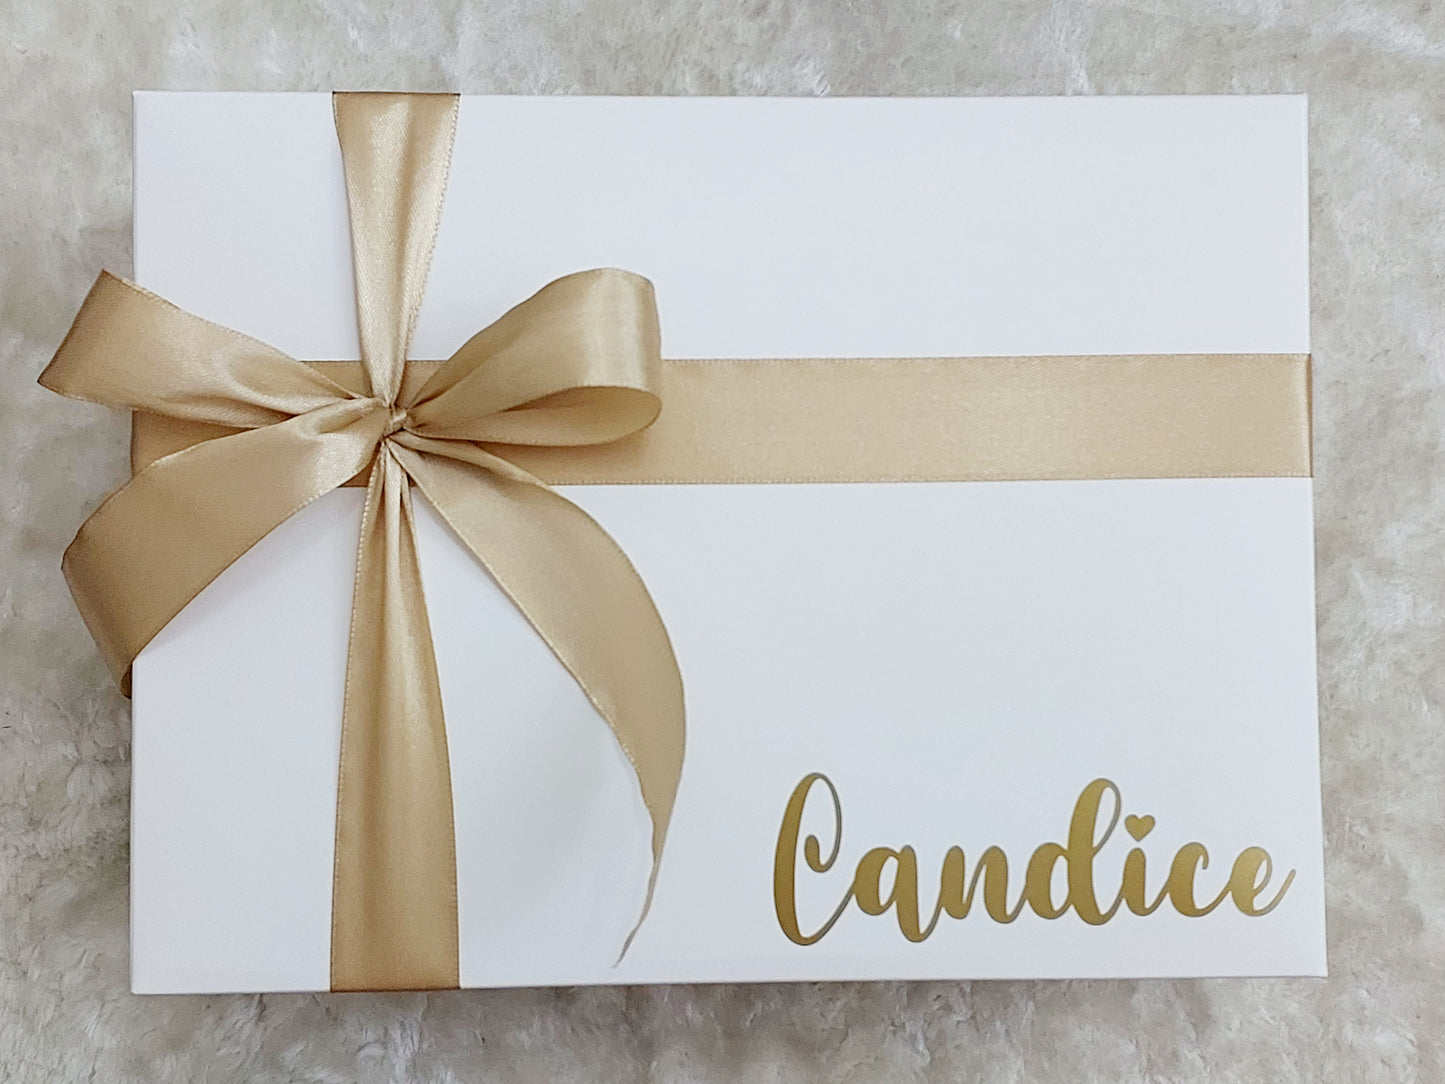 GIFT BOX - PUT MY ORDER IN A BOX PERSONALIZED WITH A NAME